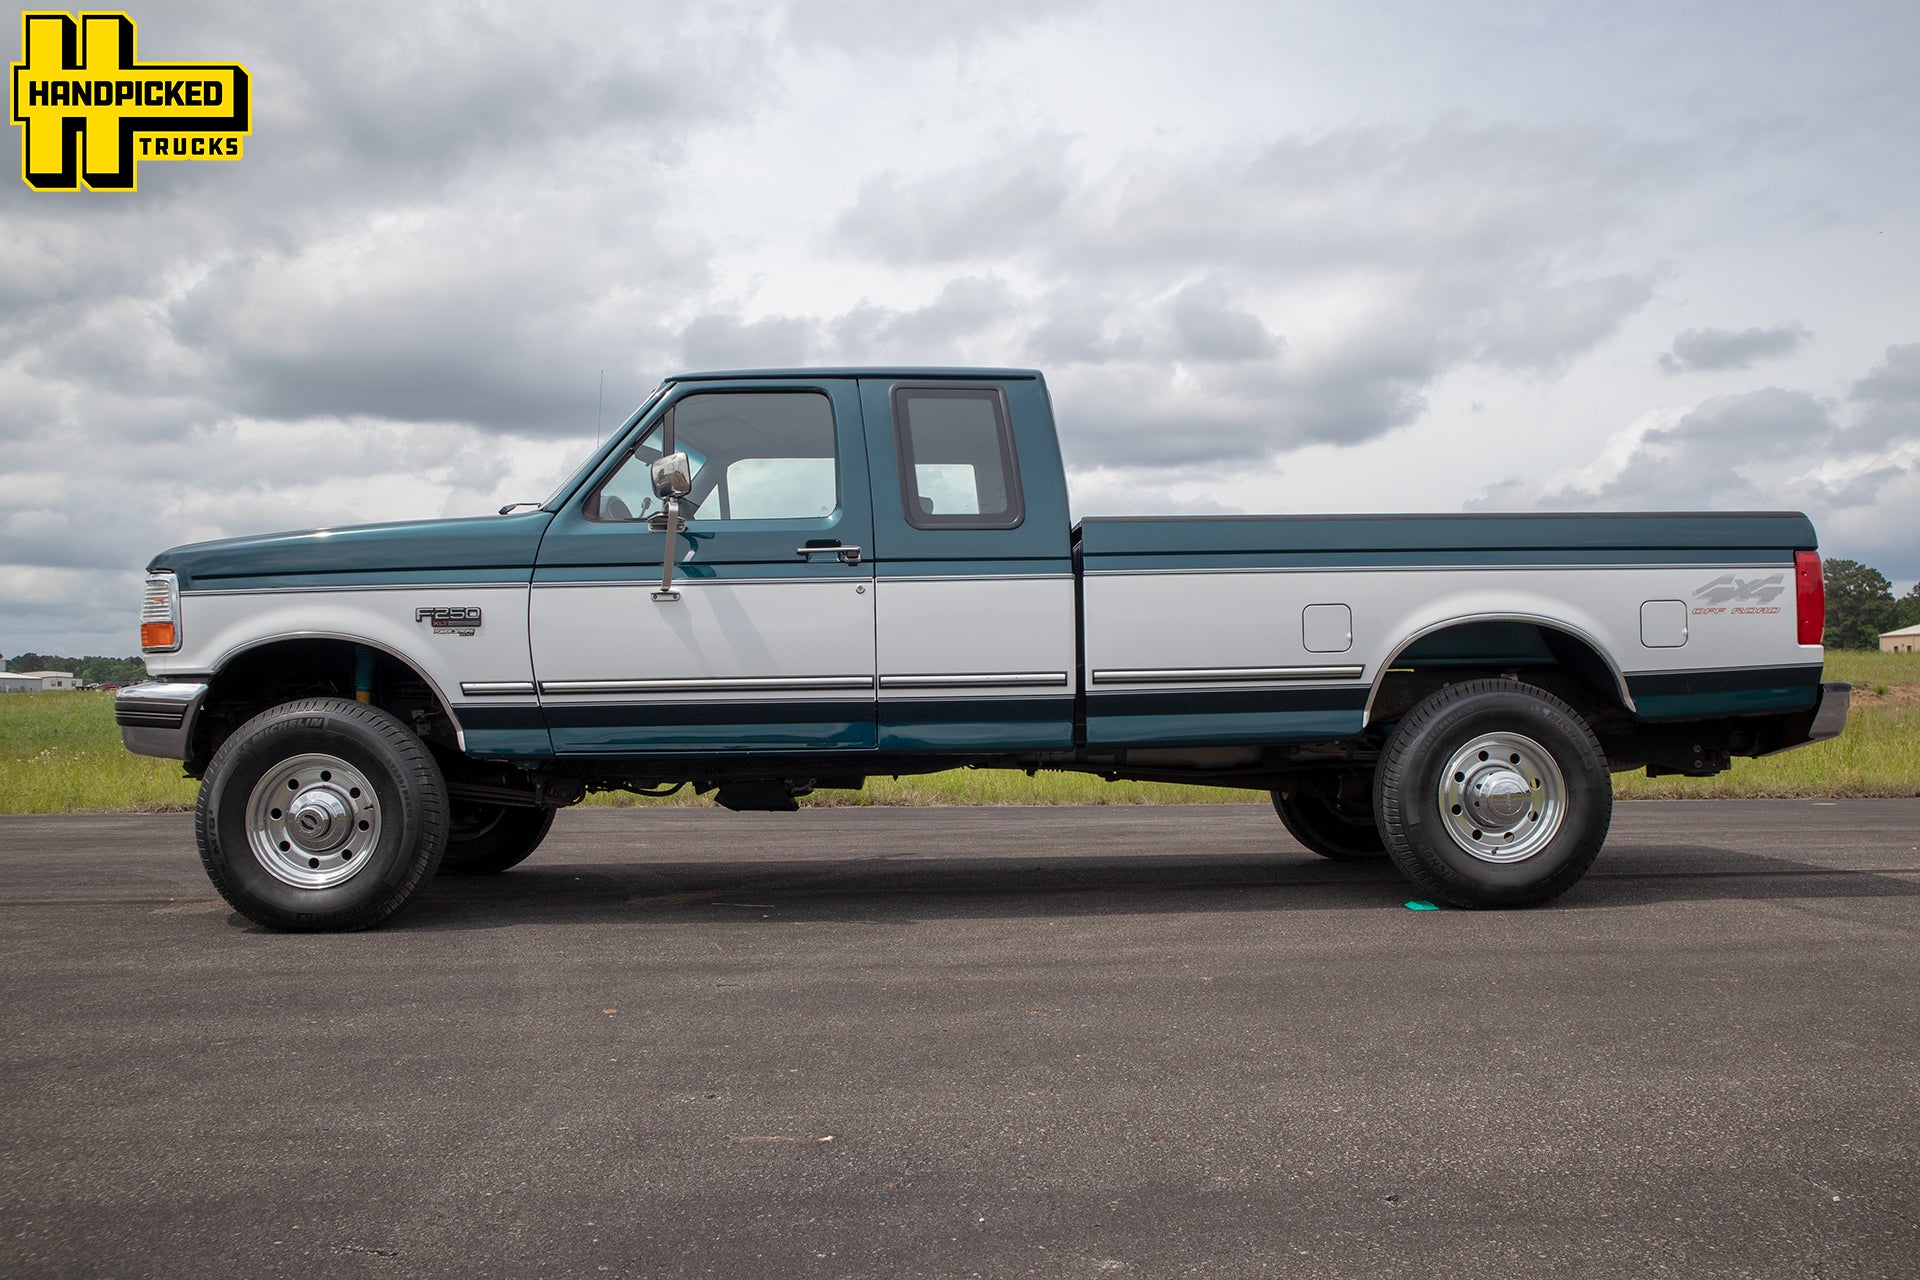 Sold 1996 Ford F250 Extended Cab Long Bed Diesel Truck